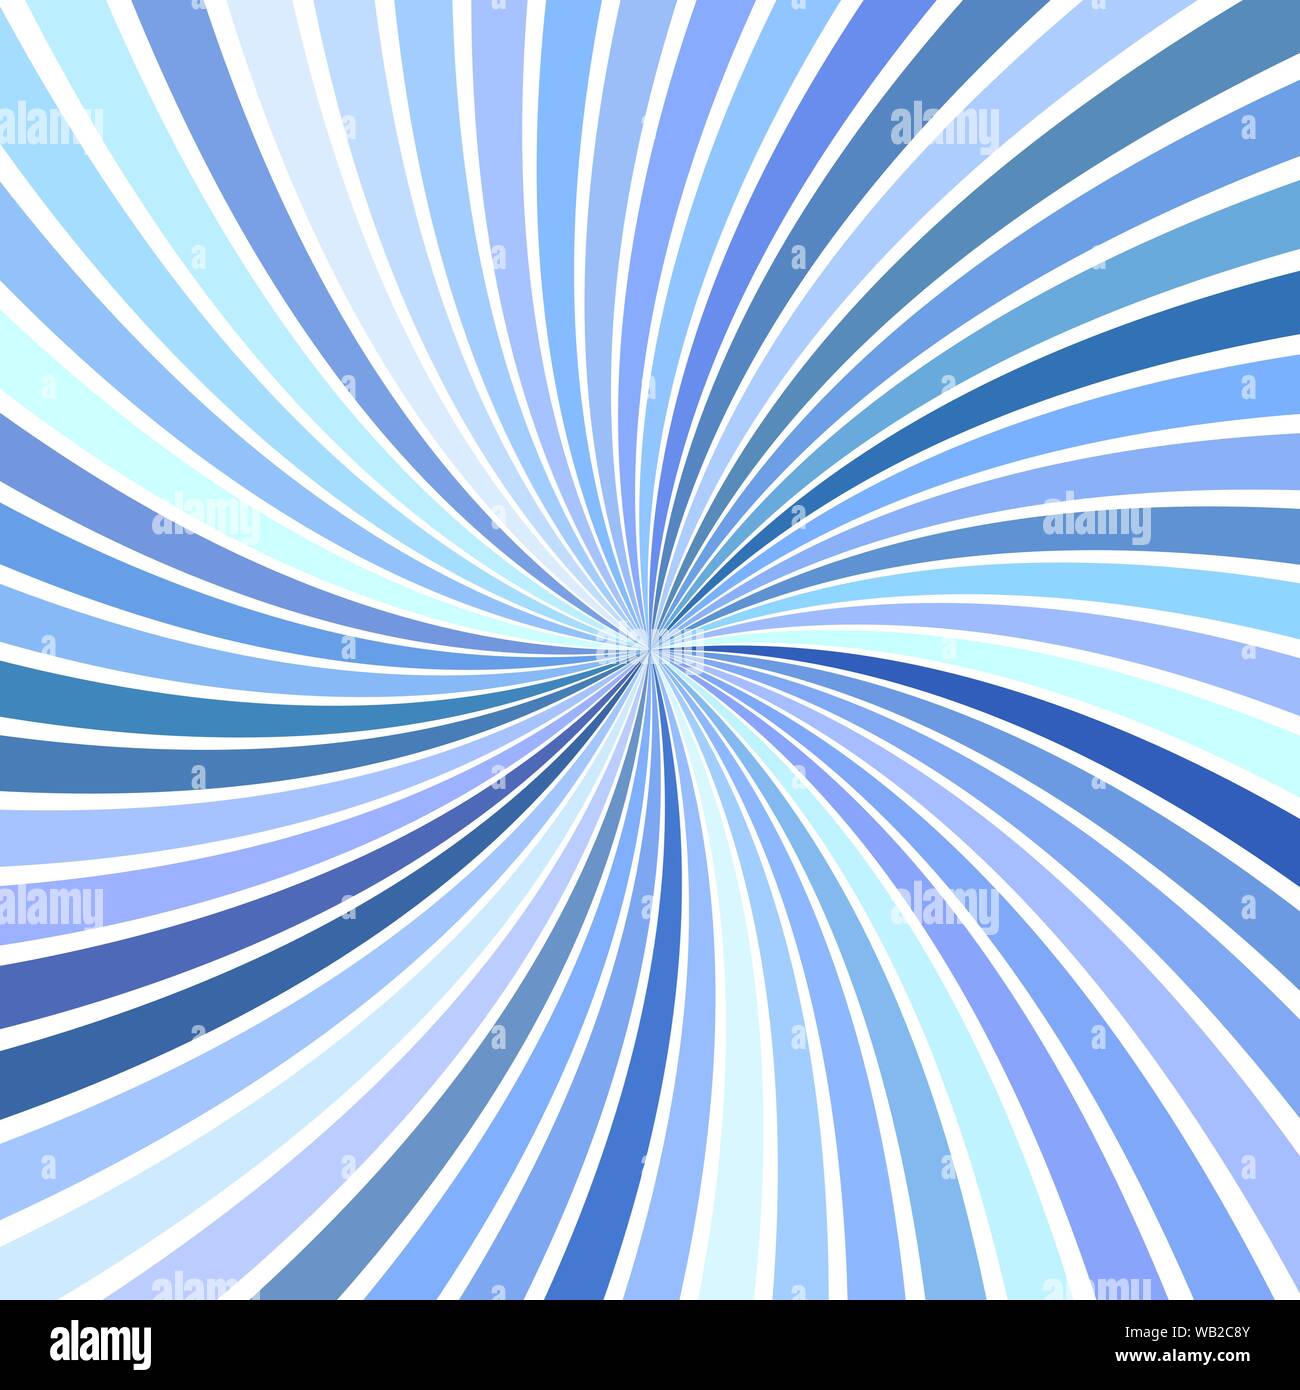 Blue and white spiral background - design Vector Image